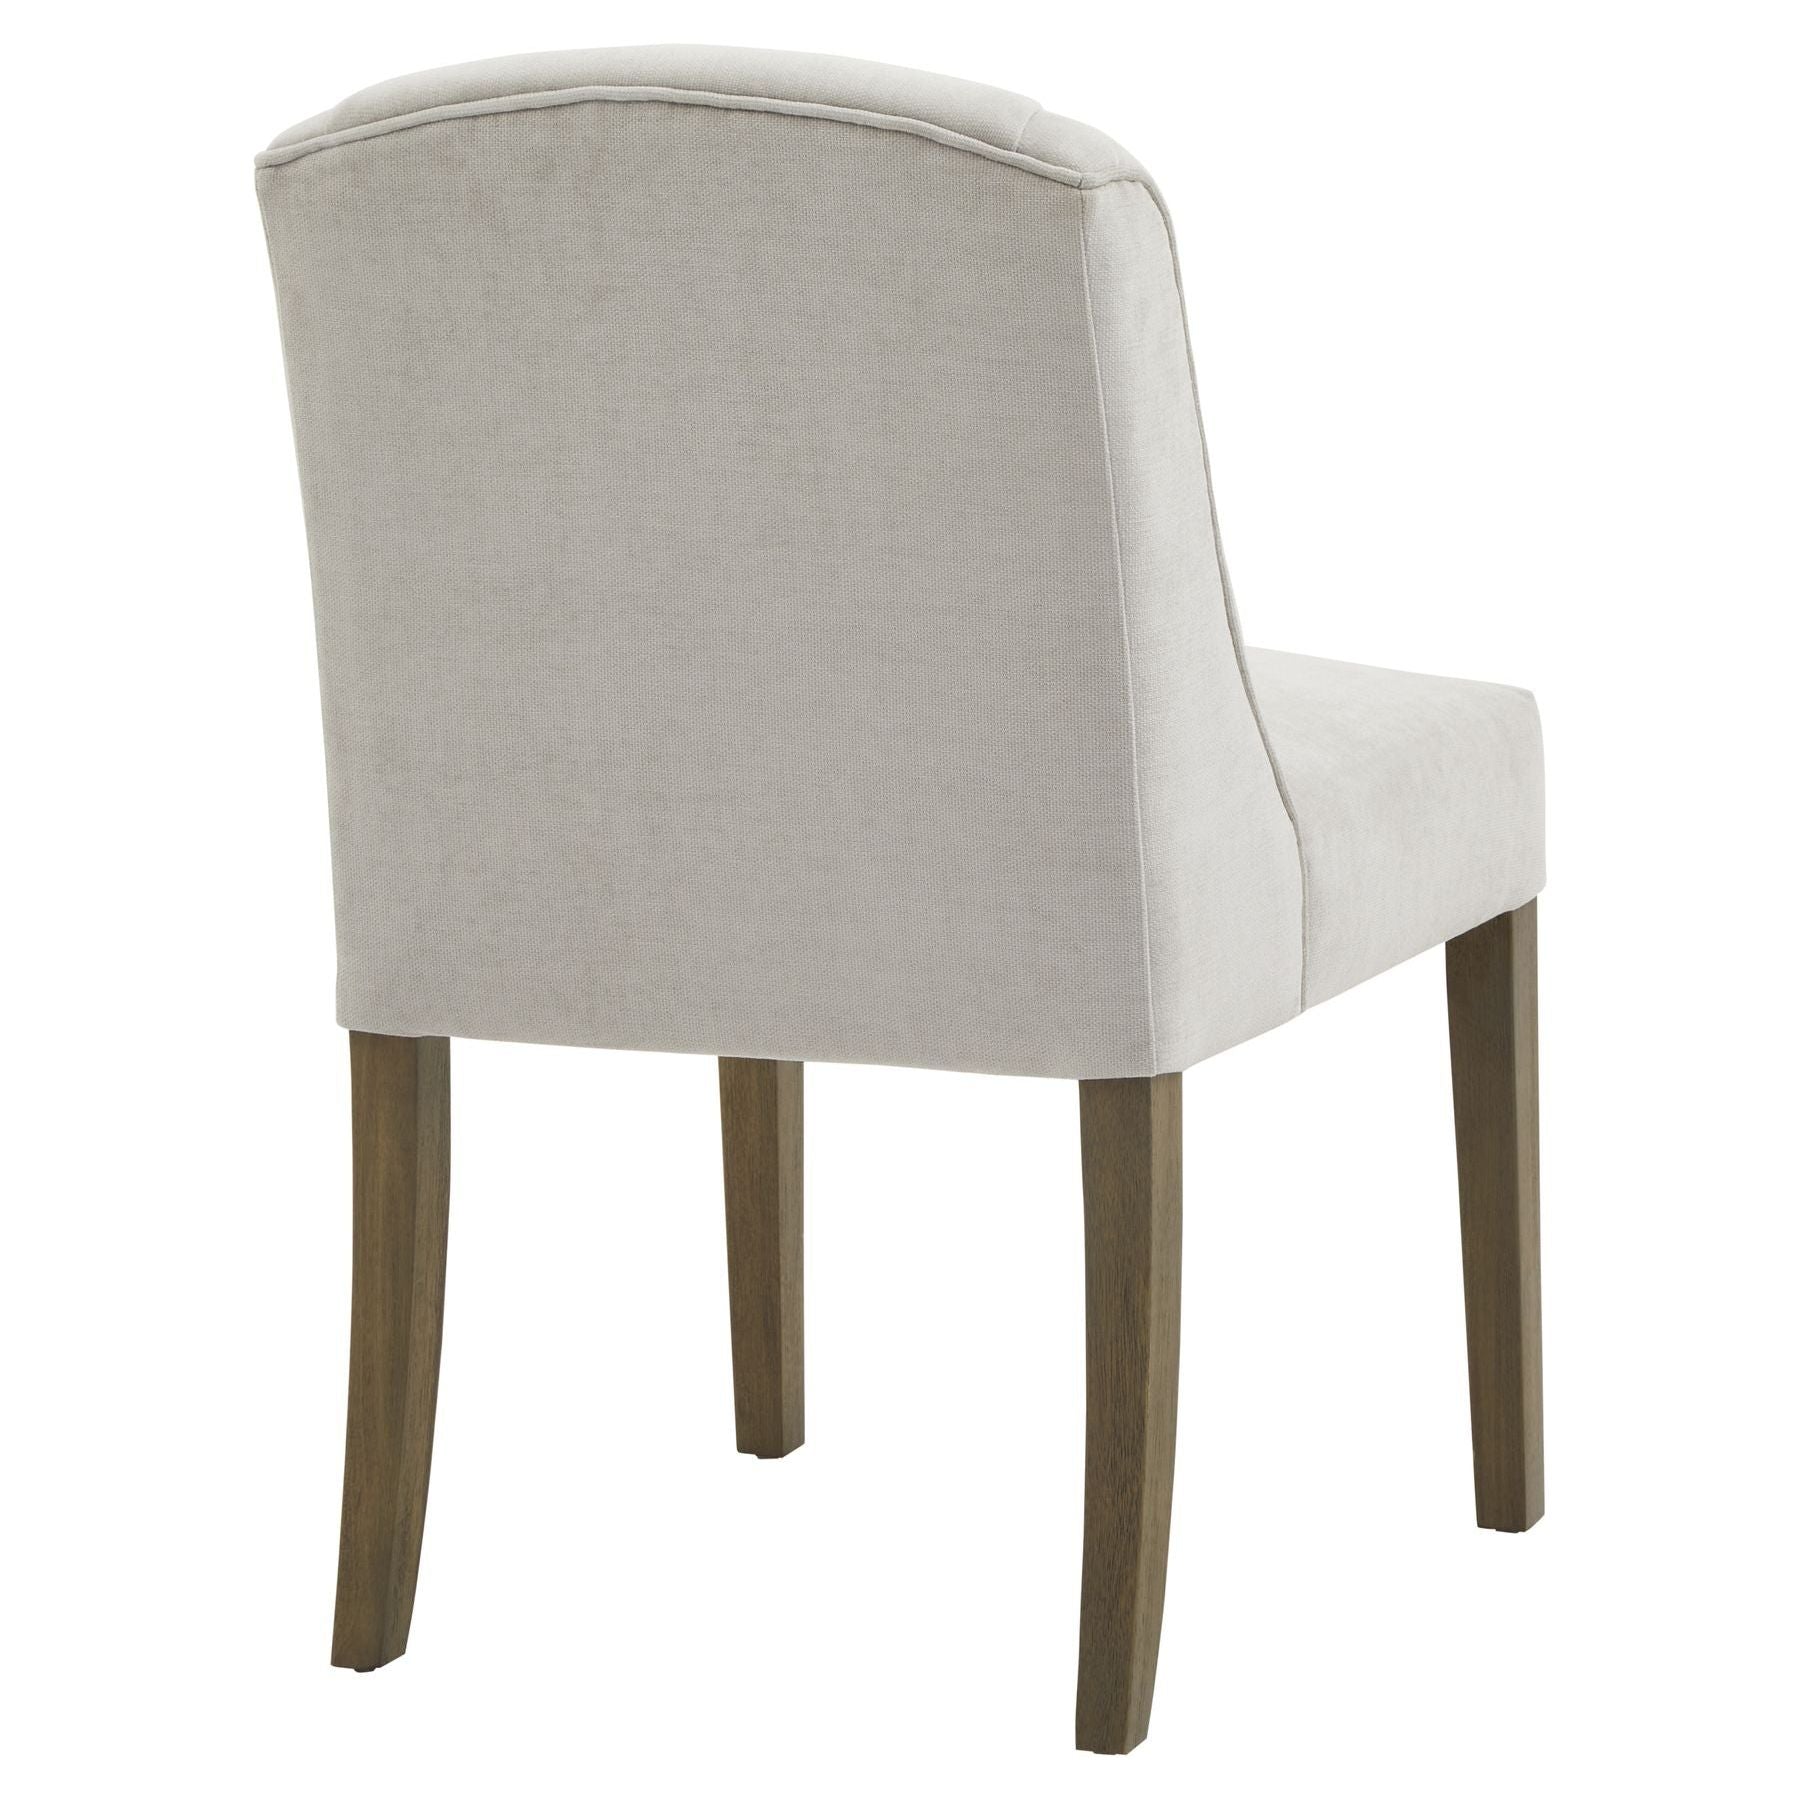 Compton Grey Dining Chair - Ashton and Finch